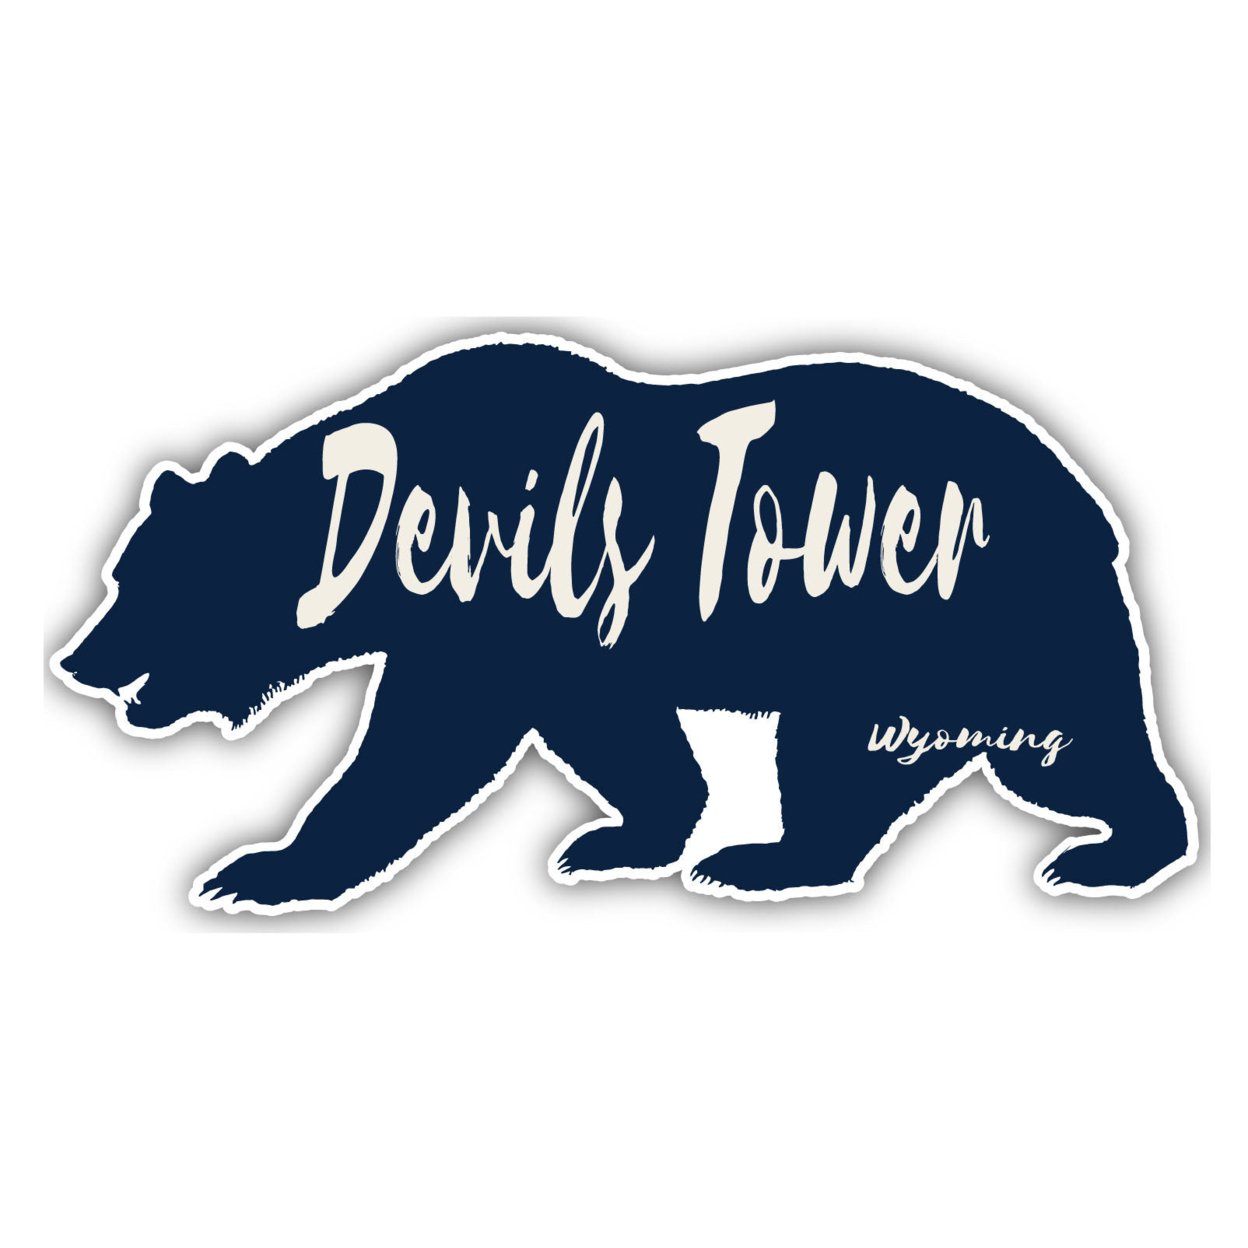 Devils Tower Wyoming Souvenir Decorative Stickers (Choose Theme And Size) - 4-Pack, 8-Inch, Bear